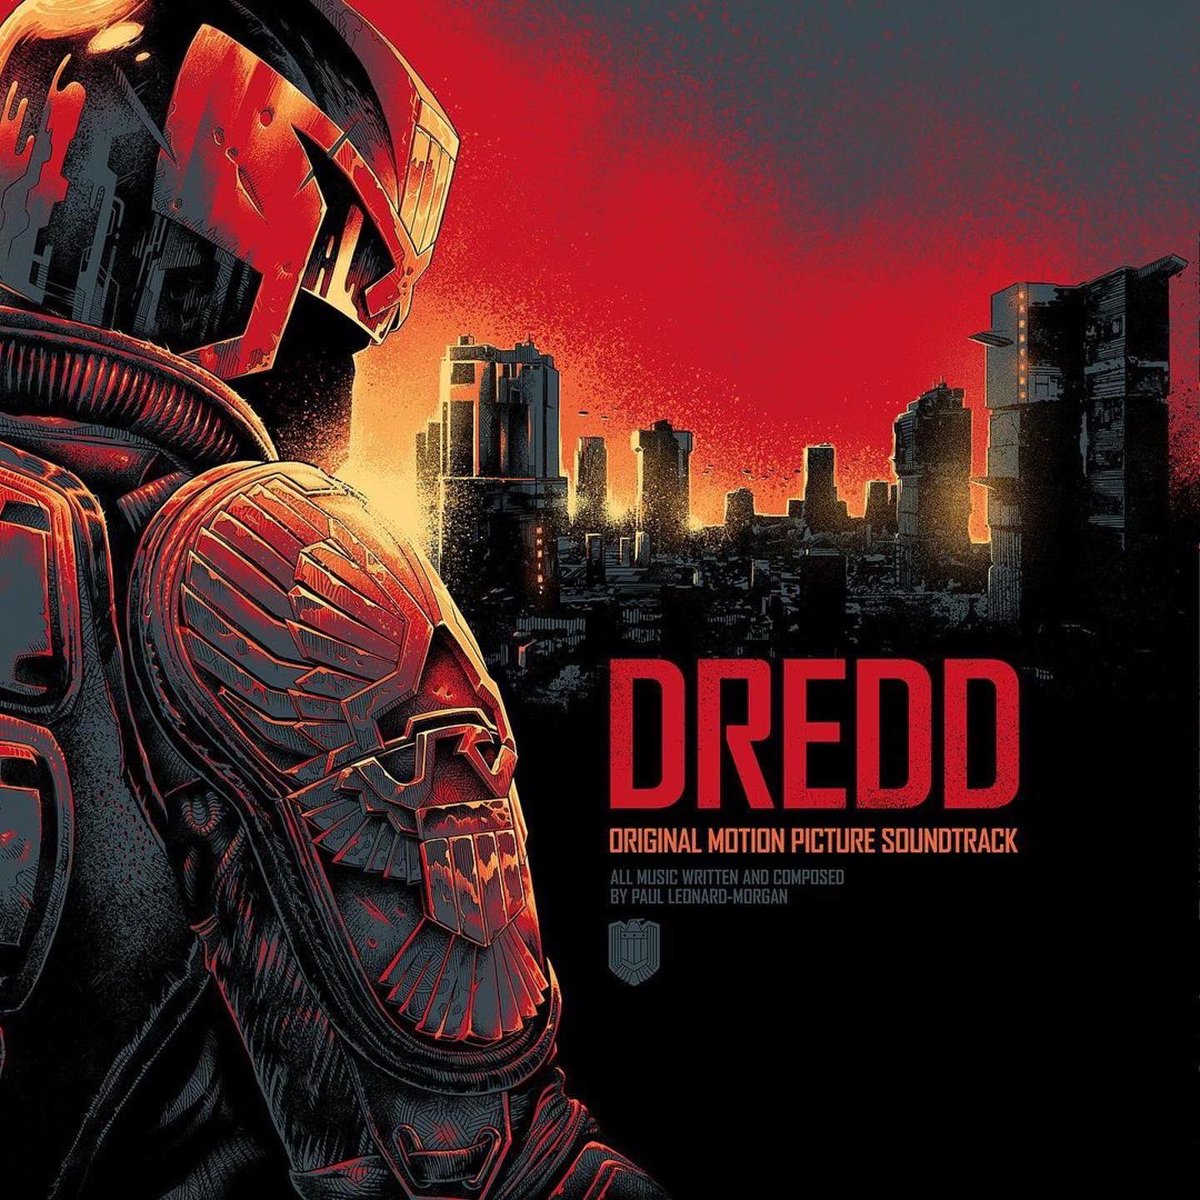 11 years ago today. Who remembers this?! @2000AD @MondoNews #dredd